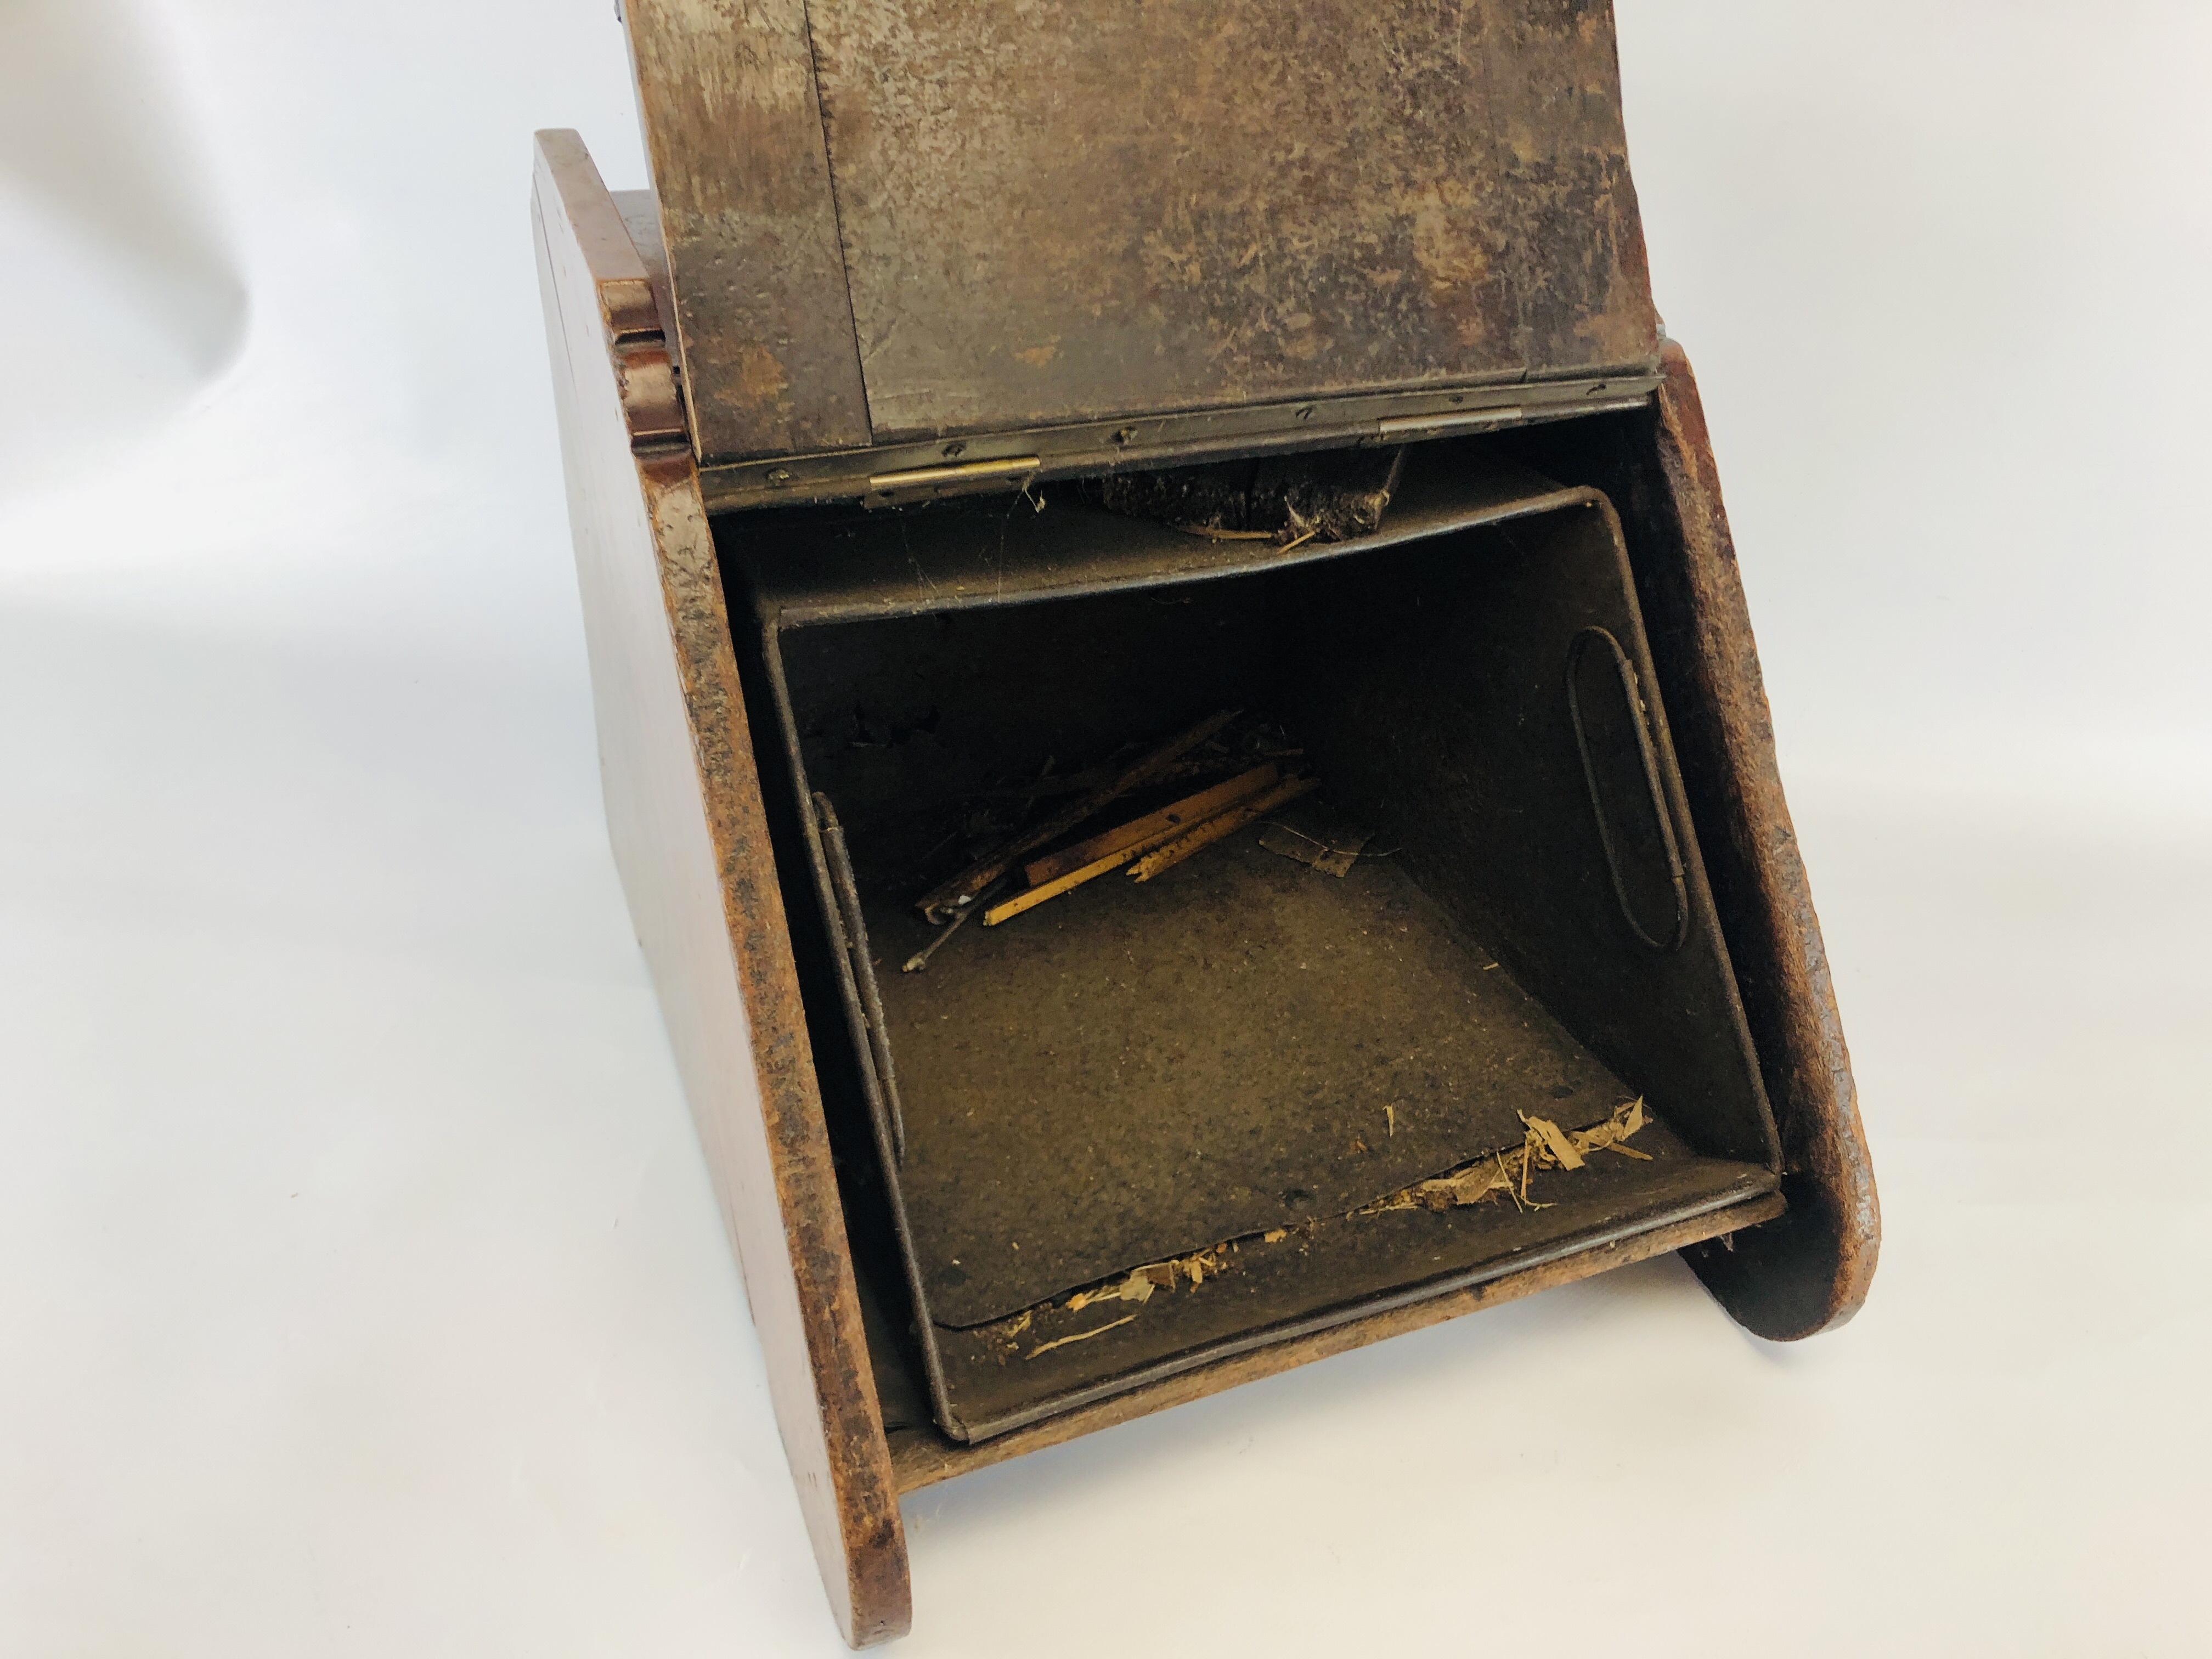 ANTIQUE EDWARDIAN MAHOGANY AND BRASS COAL BOX WITH BELLOWS. - Image 5 of 7